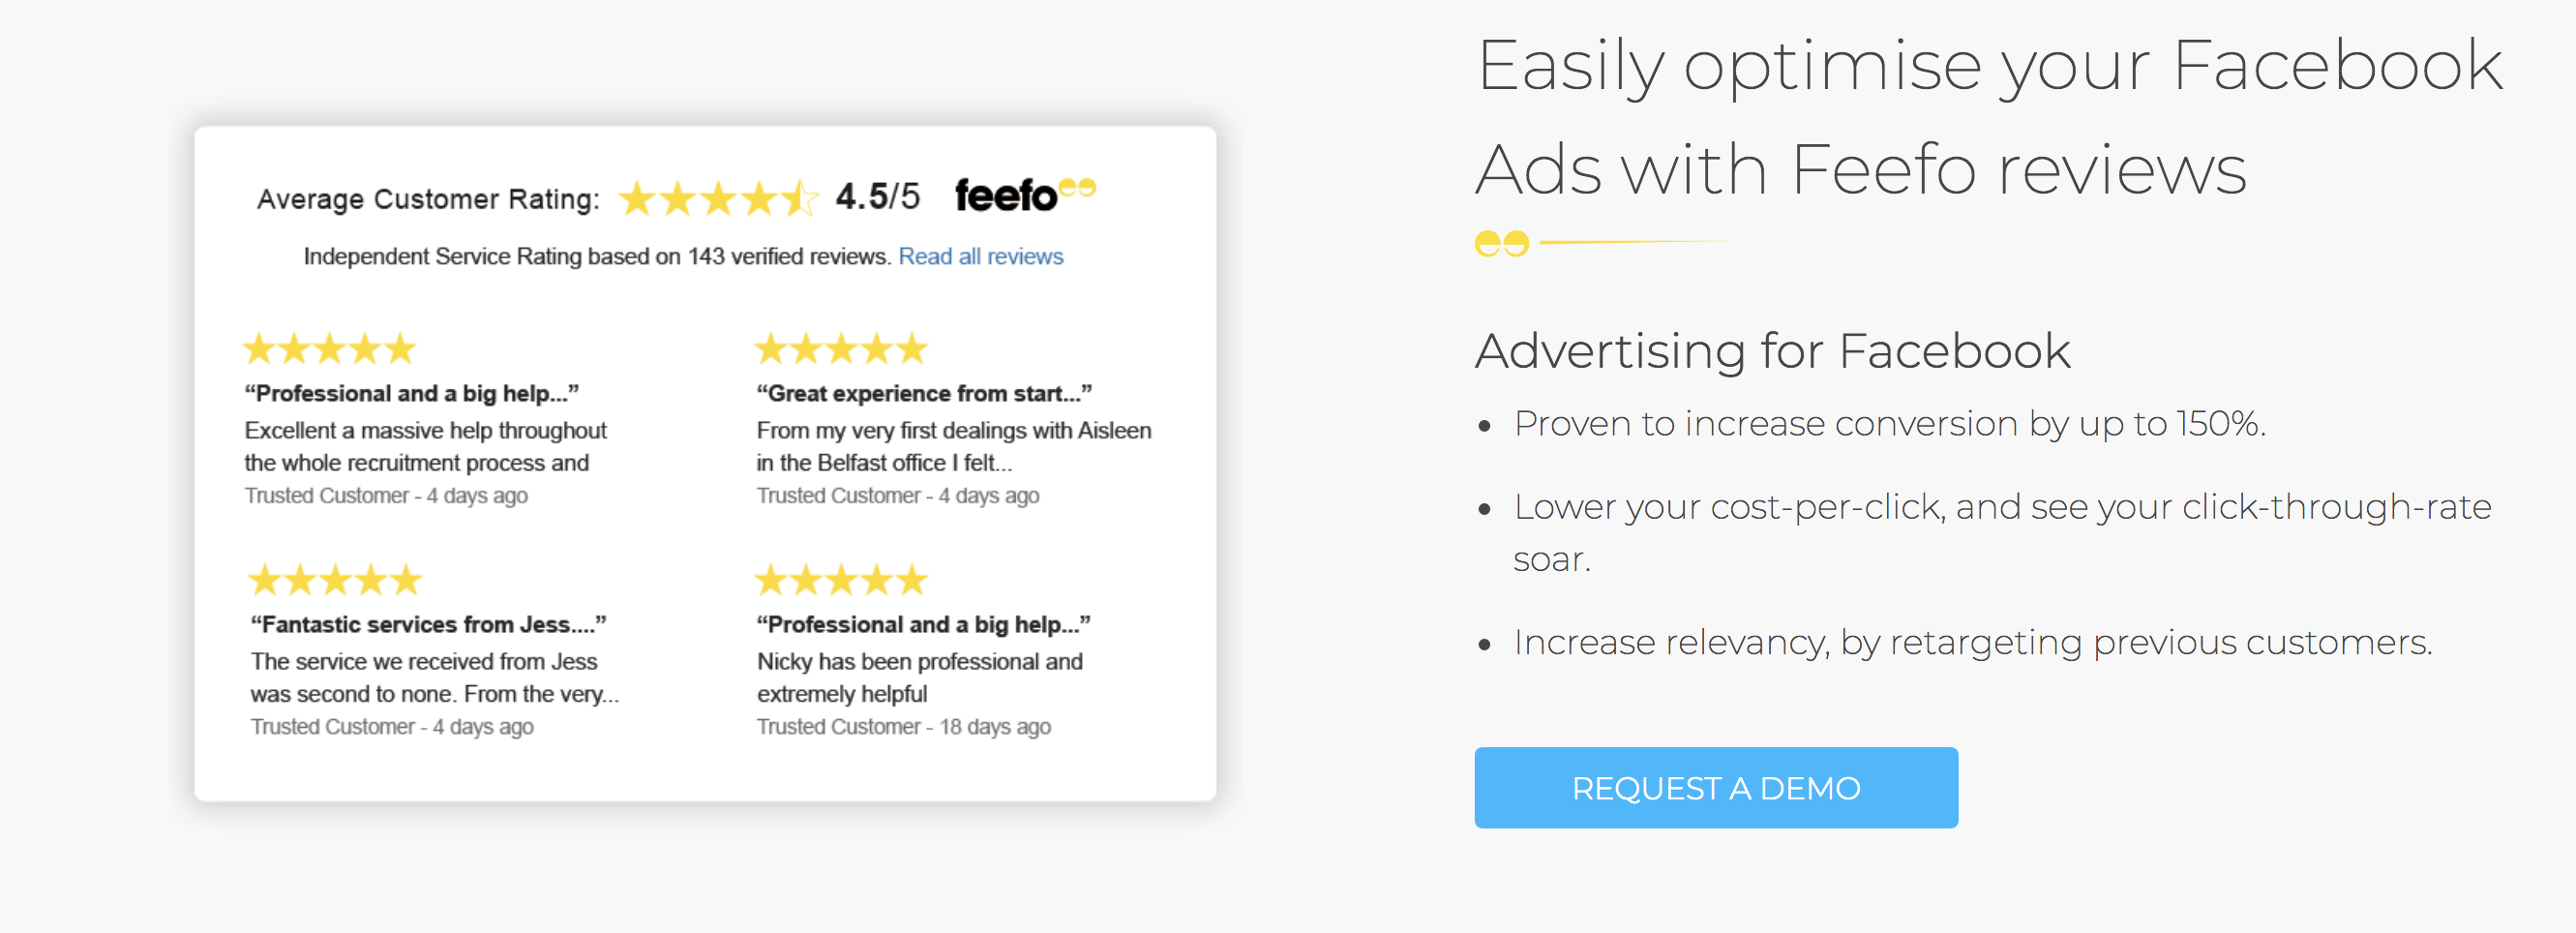 Customer reviews to ads